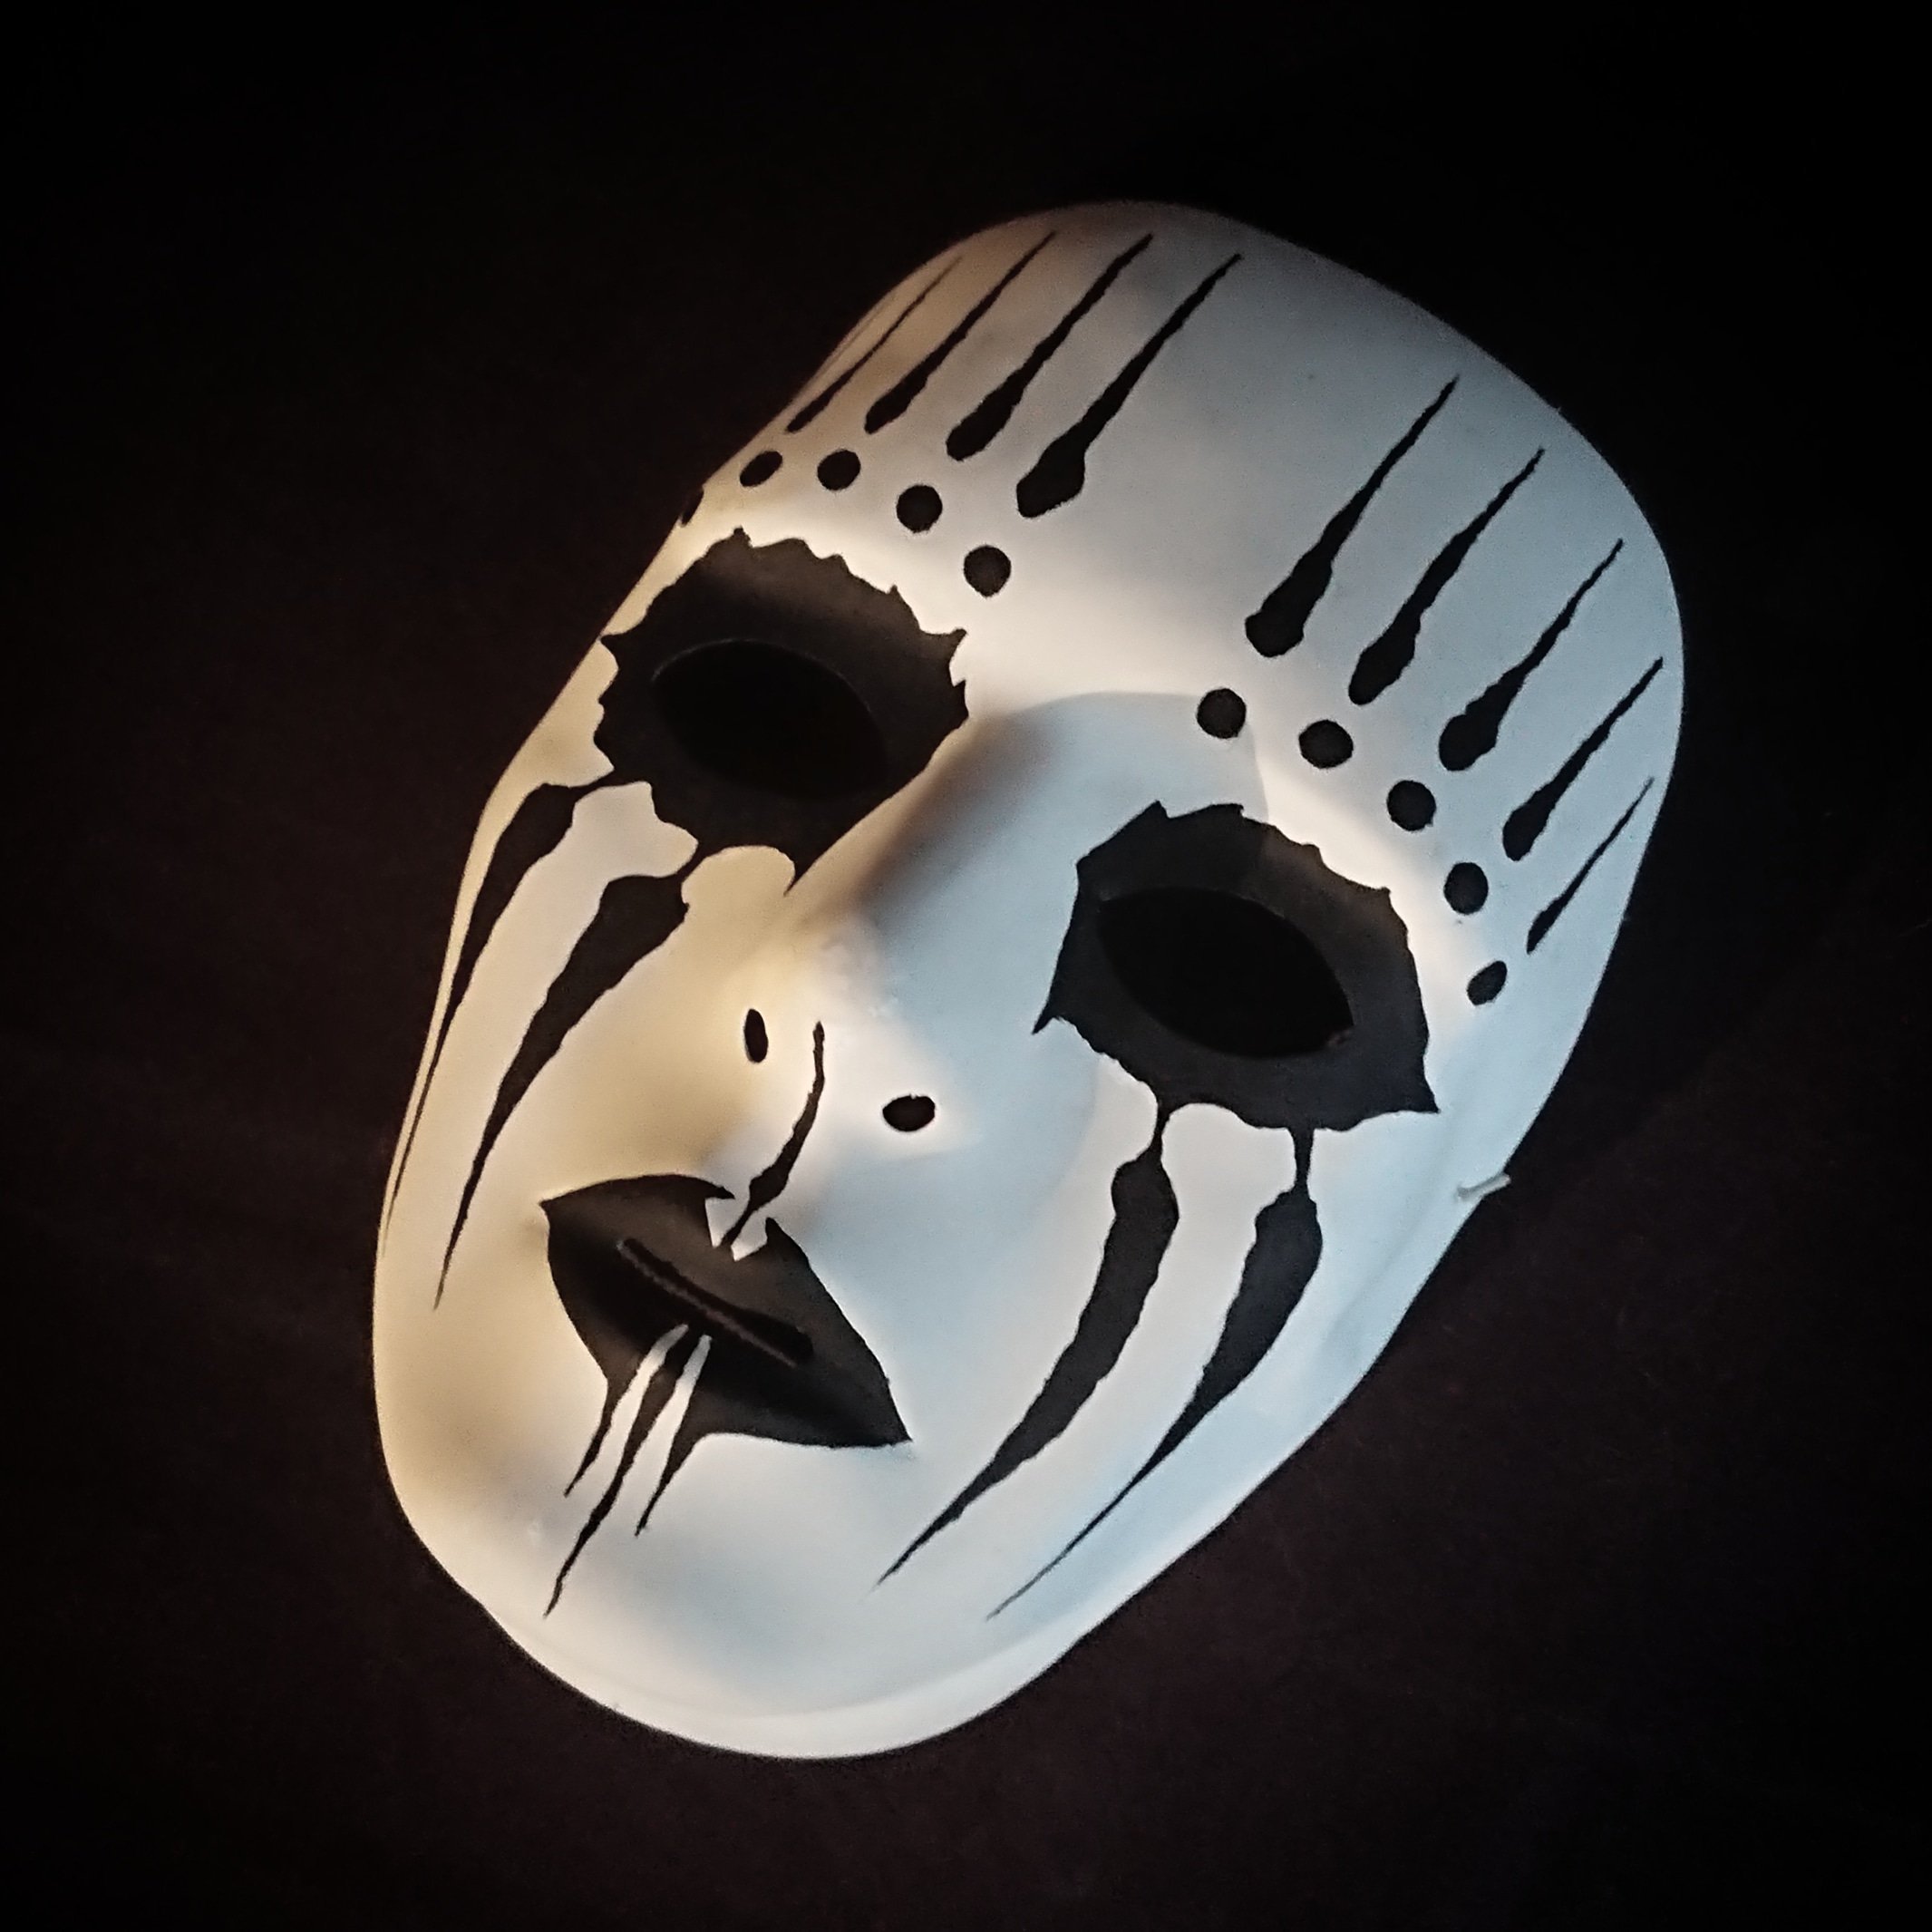 🎨 on Twitter: "Made Slipknot/Joey Jordison mask as a little commission for a drummer in a Slipknot coverband. I will never get the fact he's not in the